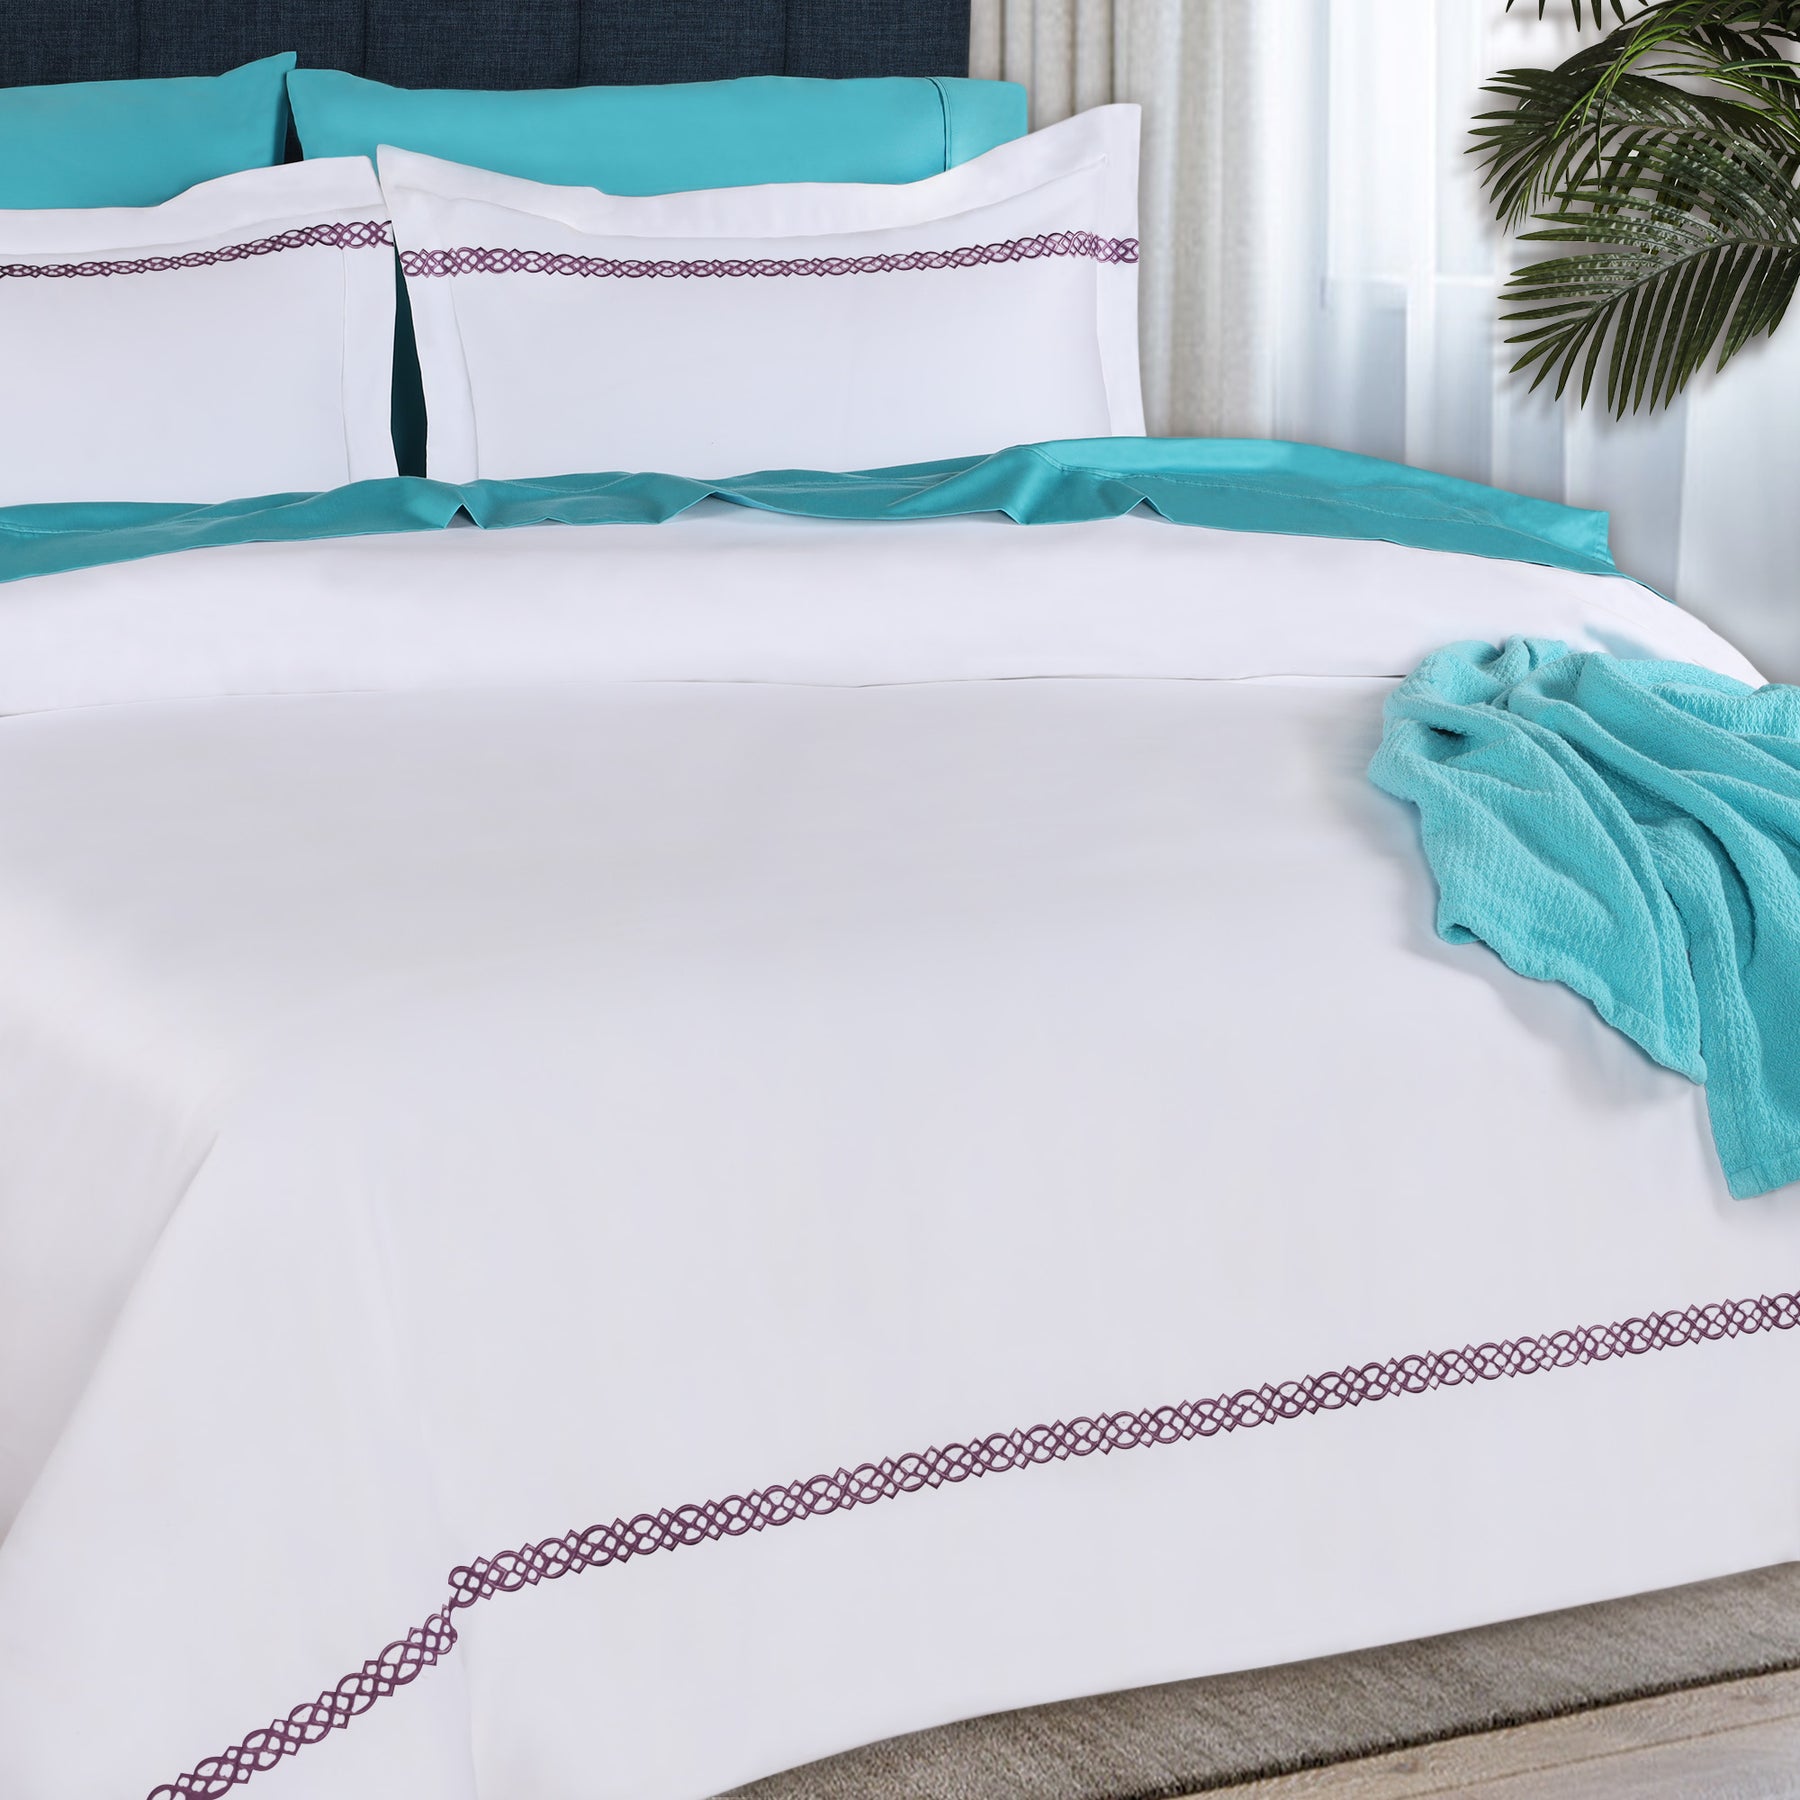 1000 Thread Count Egyptian Cotton Embroidered Duvet Cover Set - White/Platinum